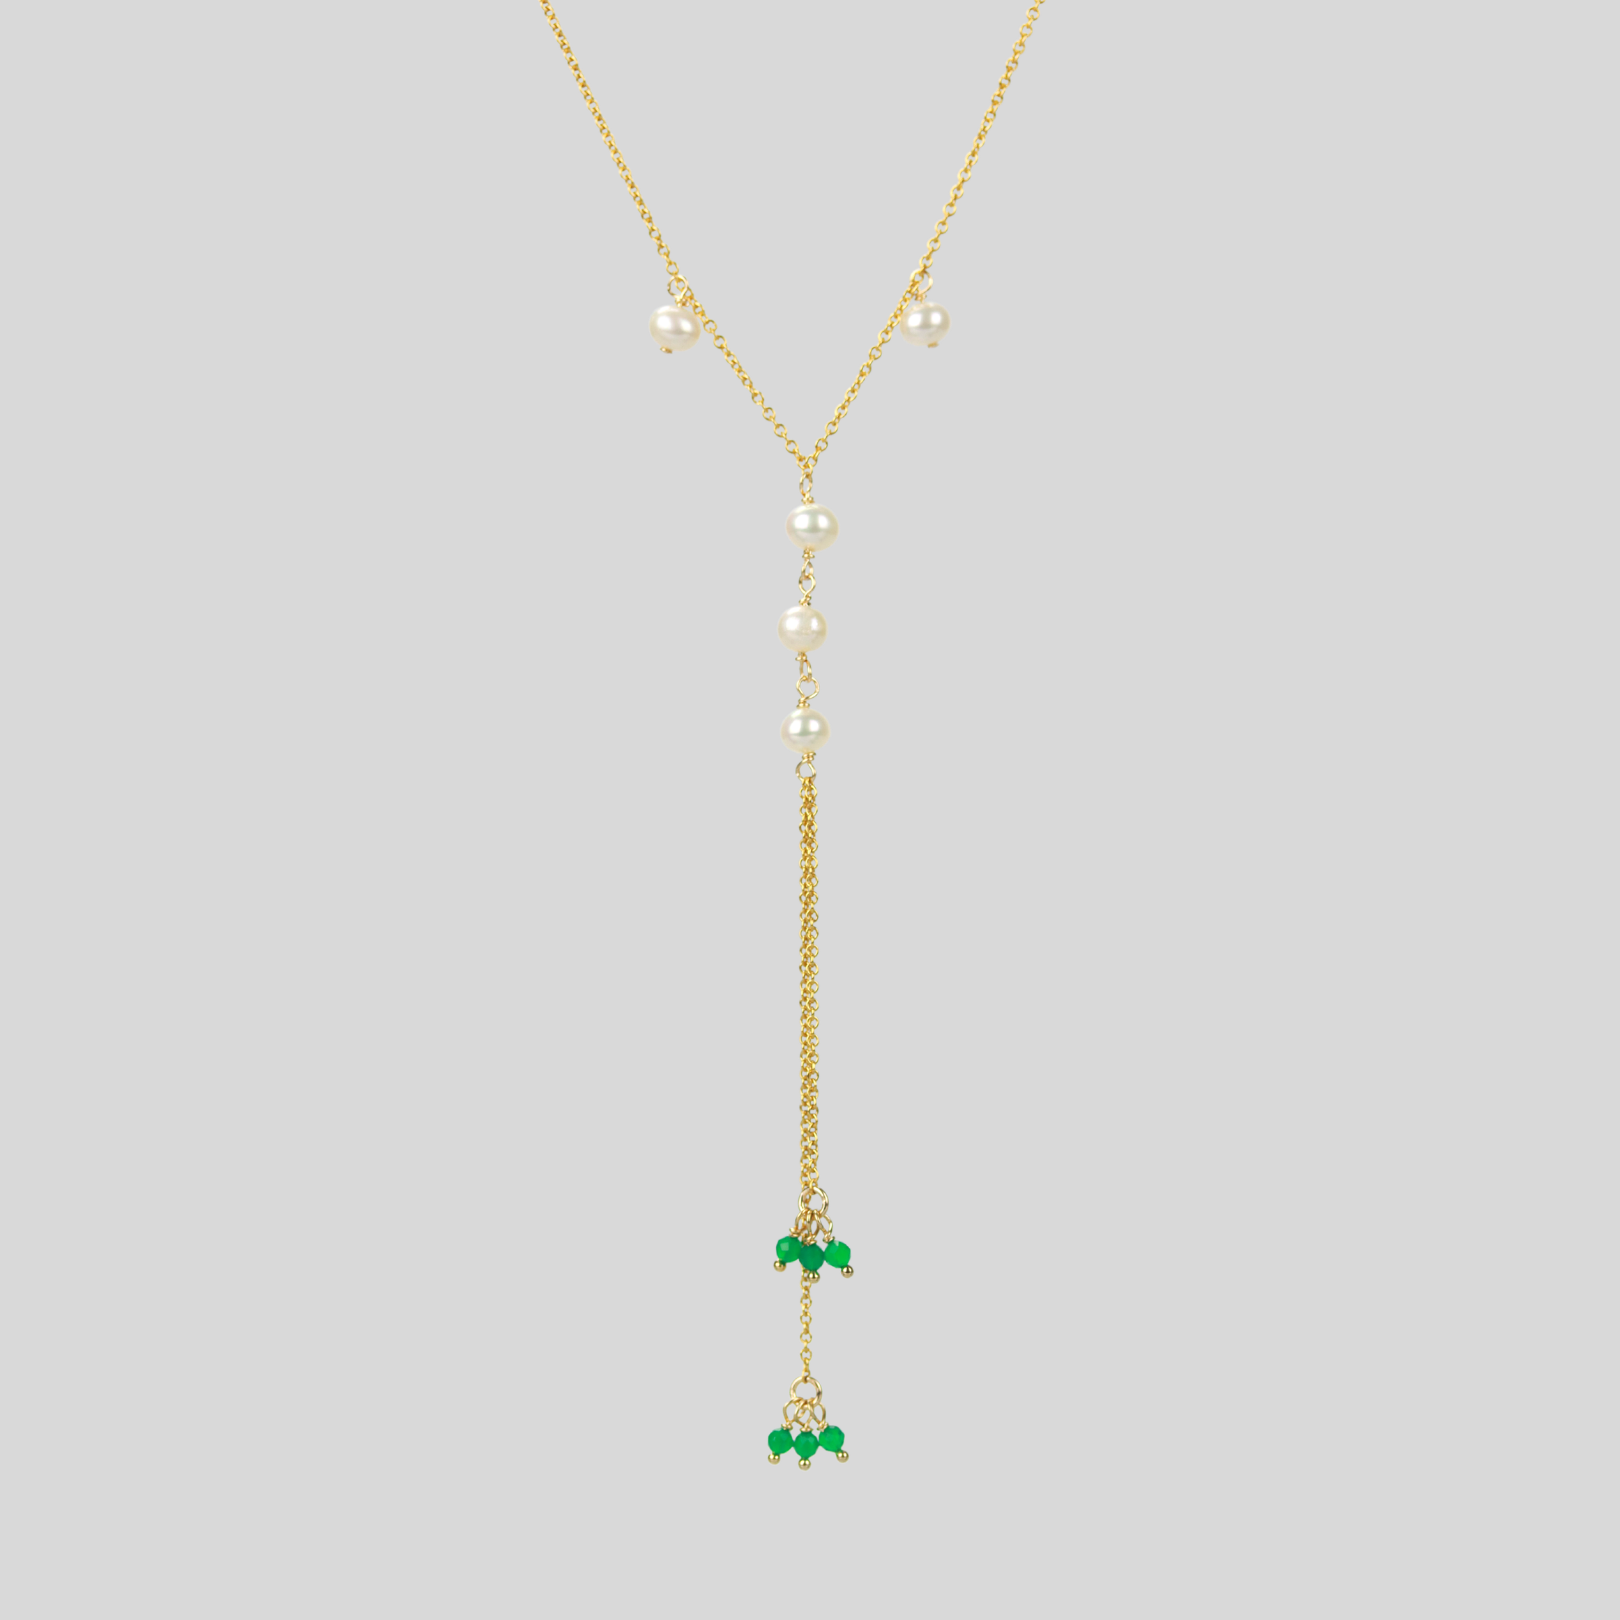 Floating pearls lariat with green onyx stones